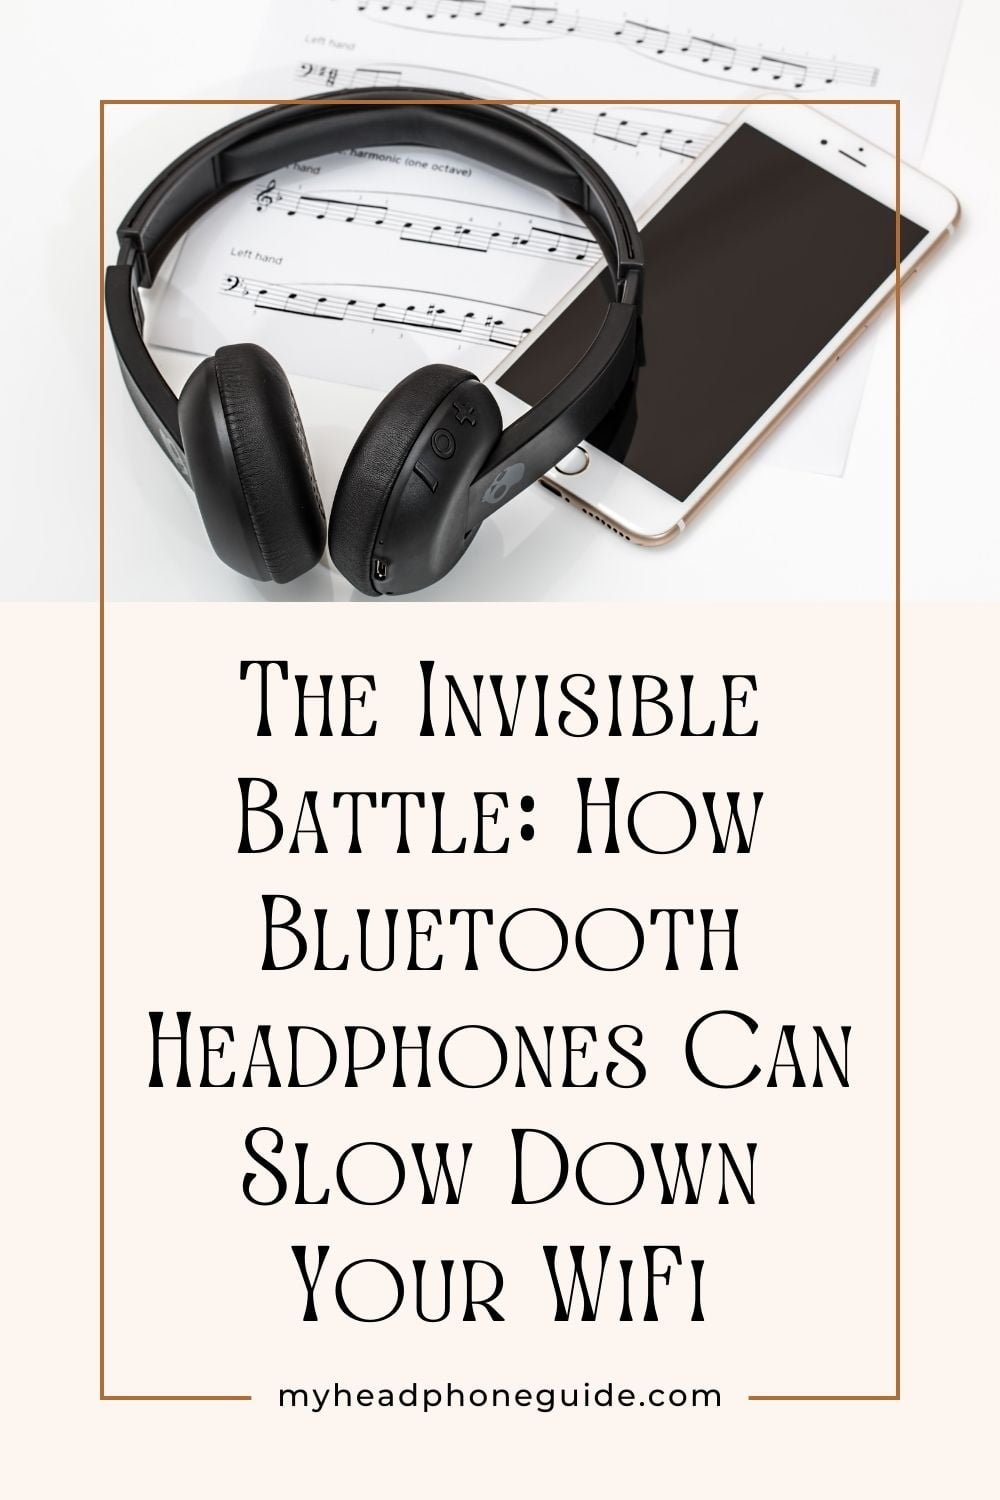 The Invisible Battle: How Bluetooth Headphones Can Slow Down Your WiFi